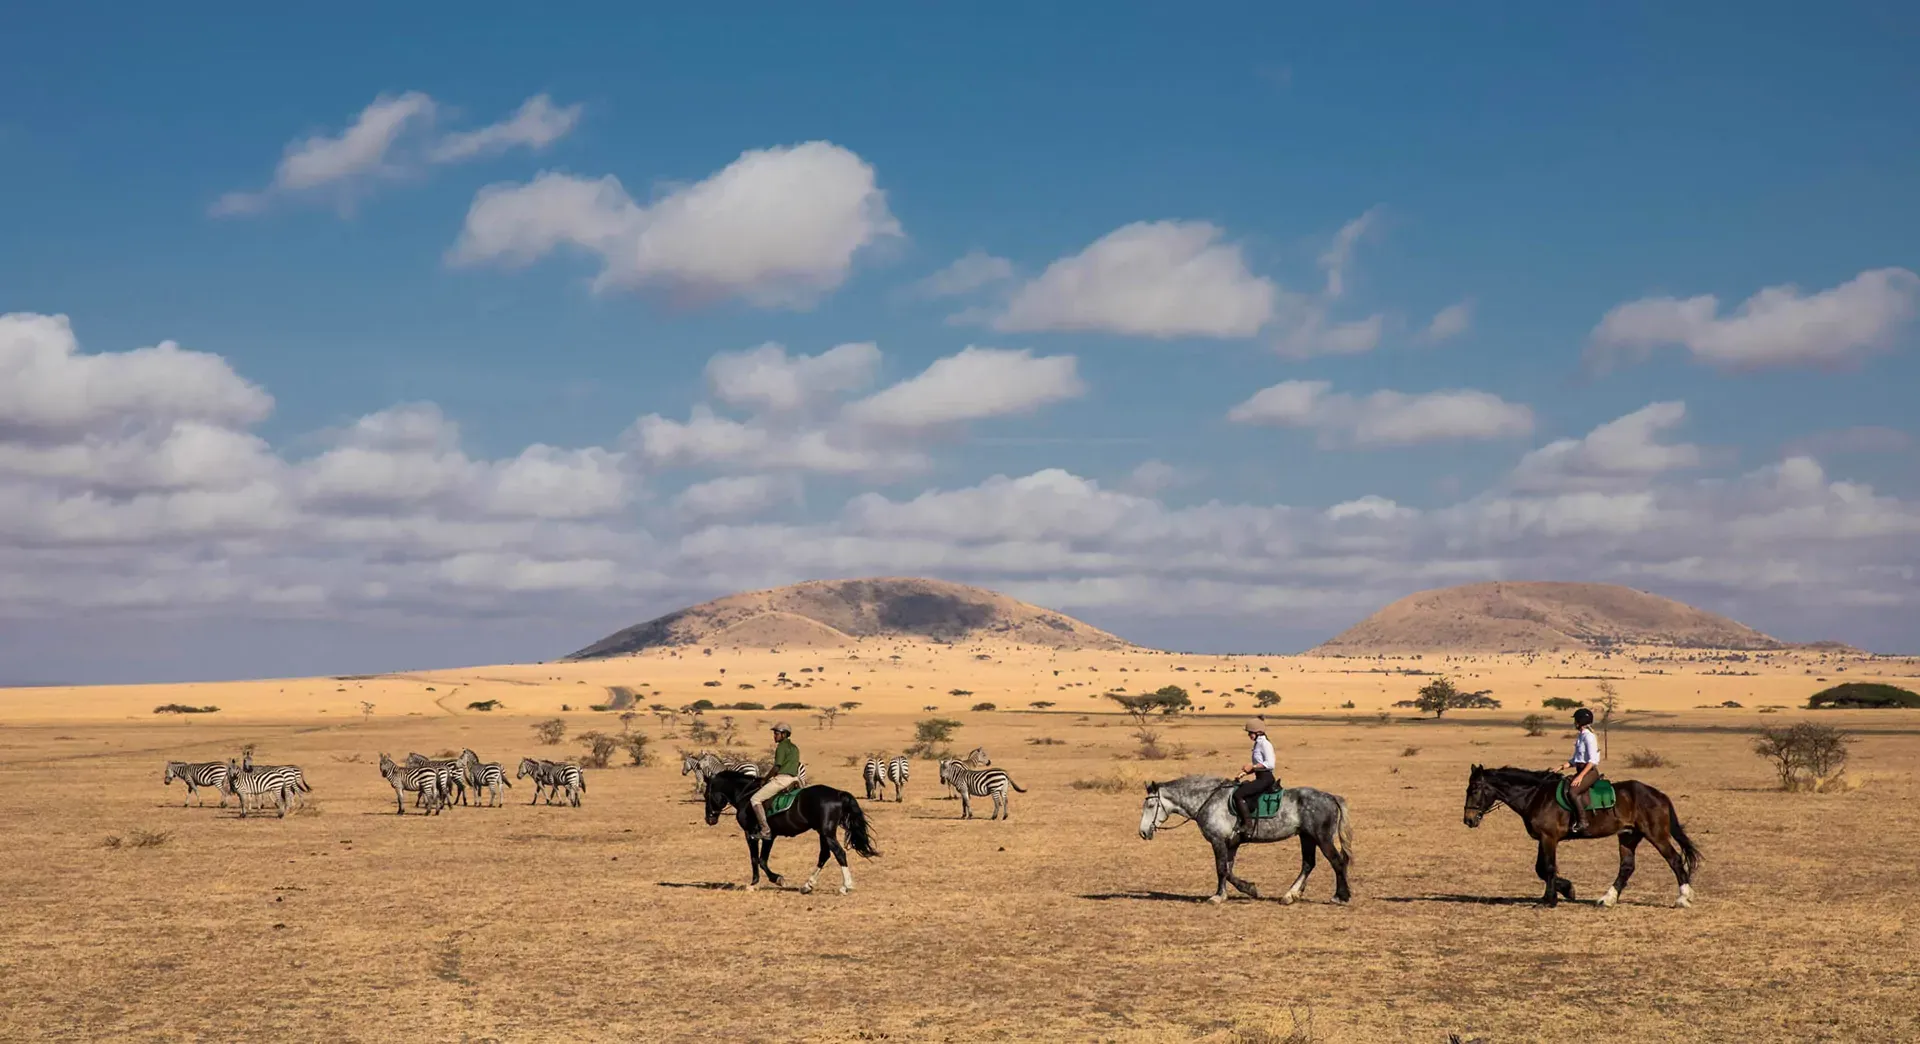 What is the price of horse riding activities in Kenya safari cost - horseriding by Ol Donyo Lodge, Chyulu Hills